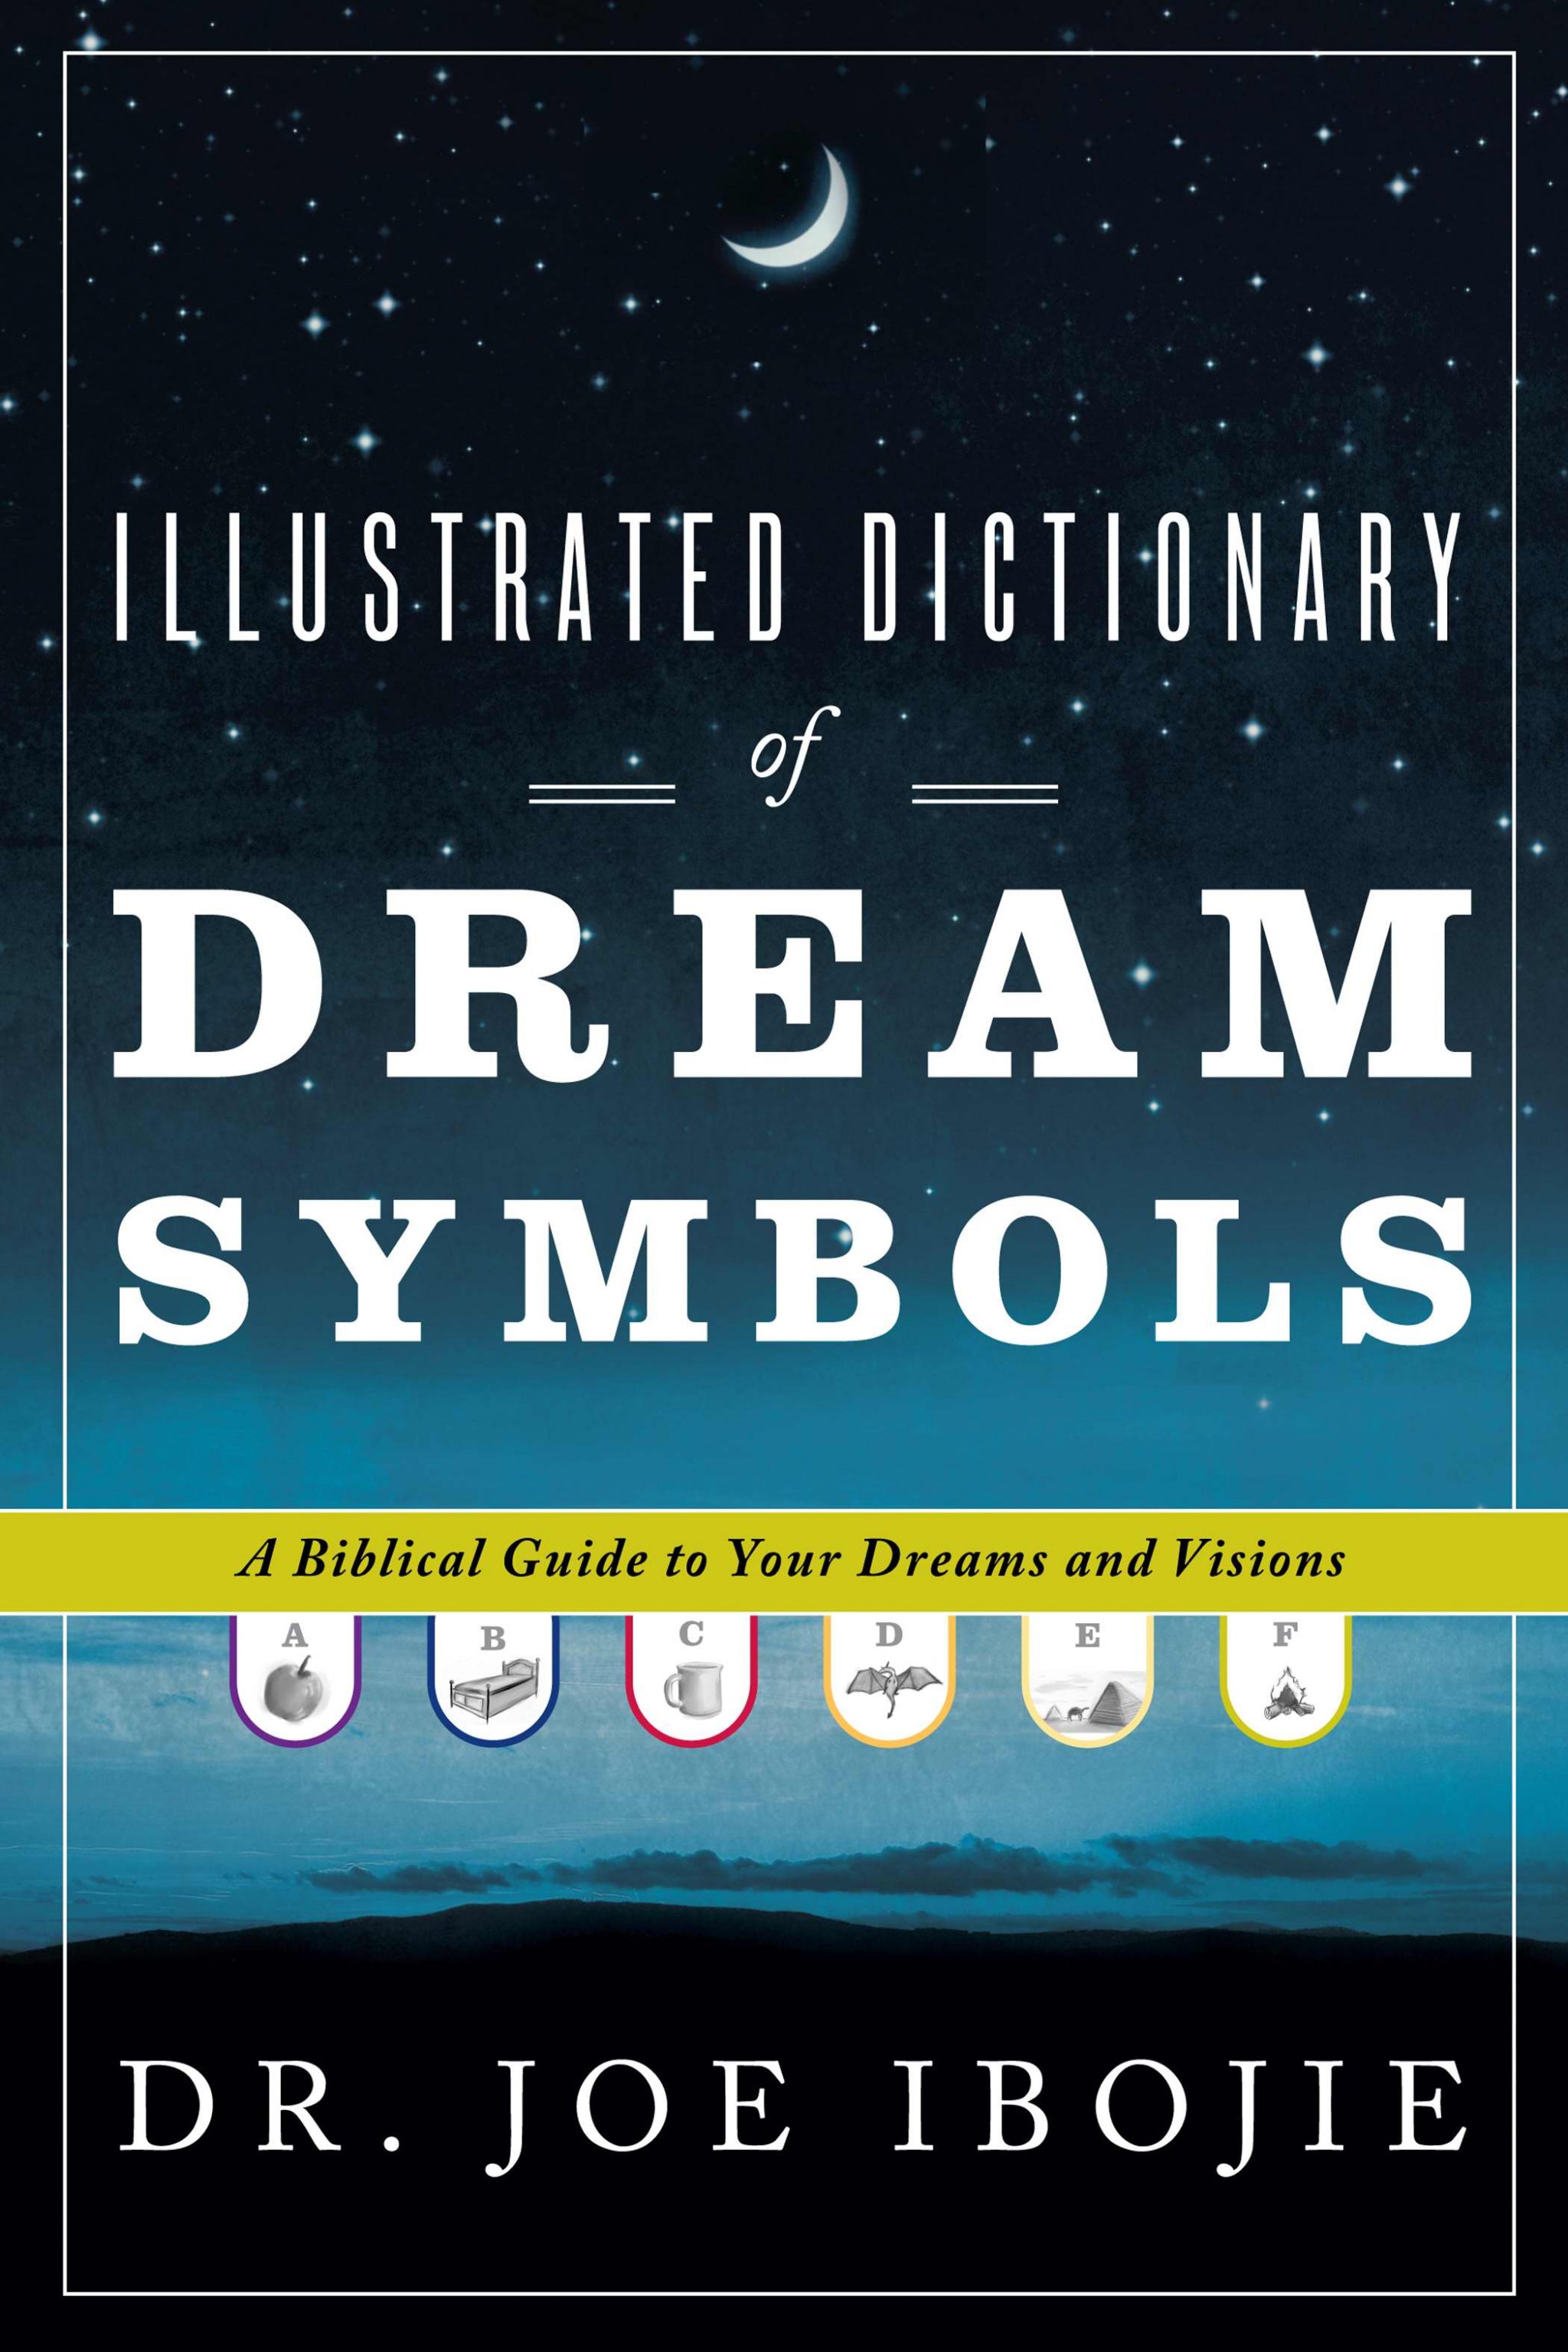 Image of Illustrated Dictionary Of Dream Symbols other